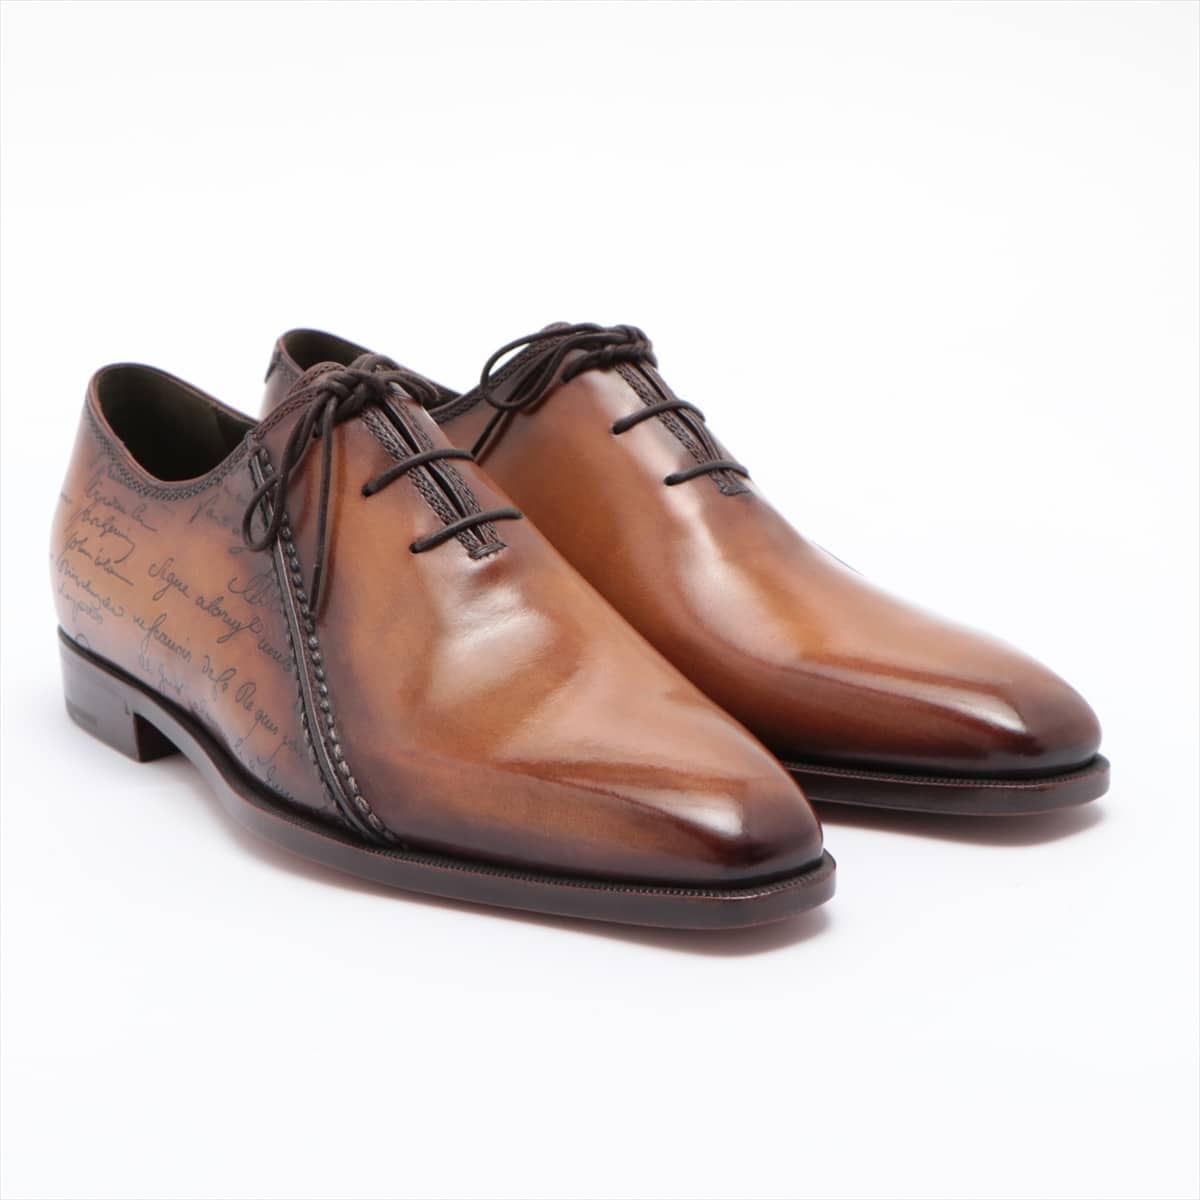 Berluti Calligraphy Leather Shoes 7 1/2 Men's Brown With genuine shoe tree